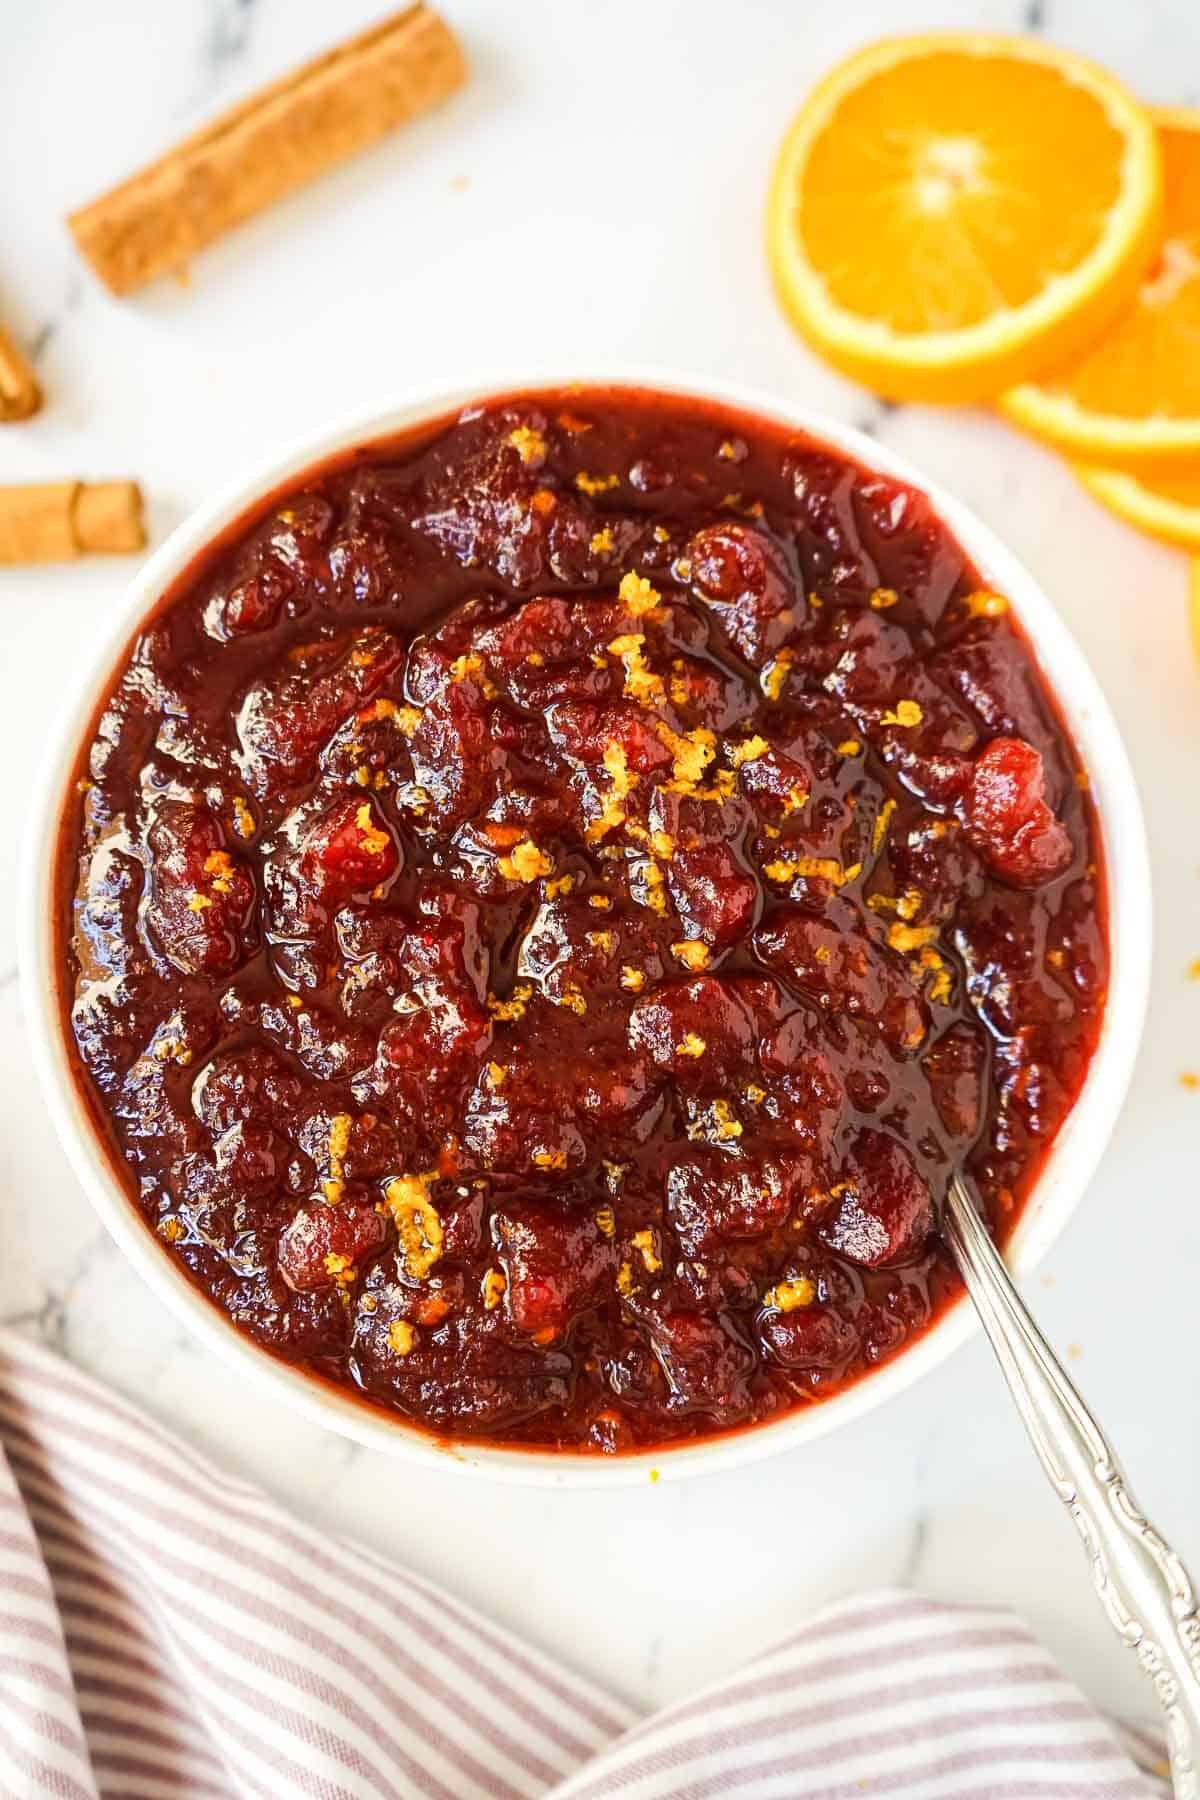 Cranberry sauce made from canned cranberries in a white serving bowl